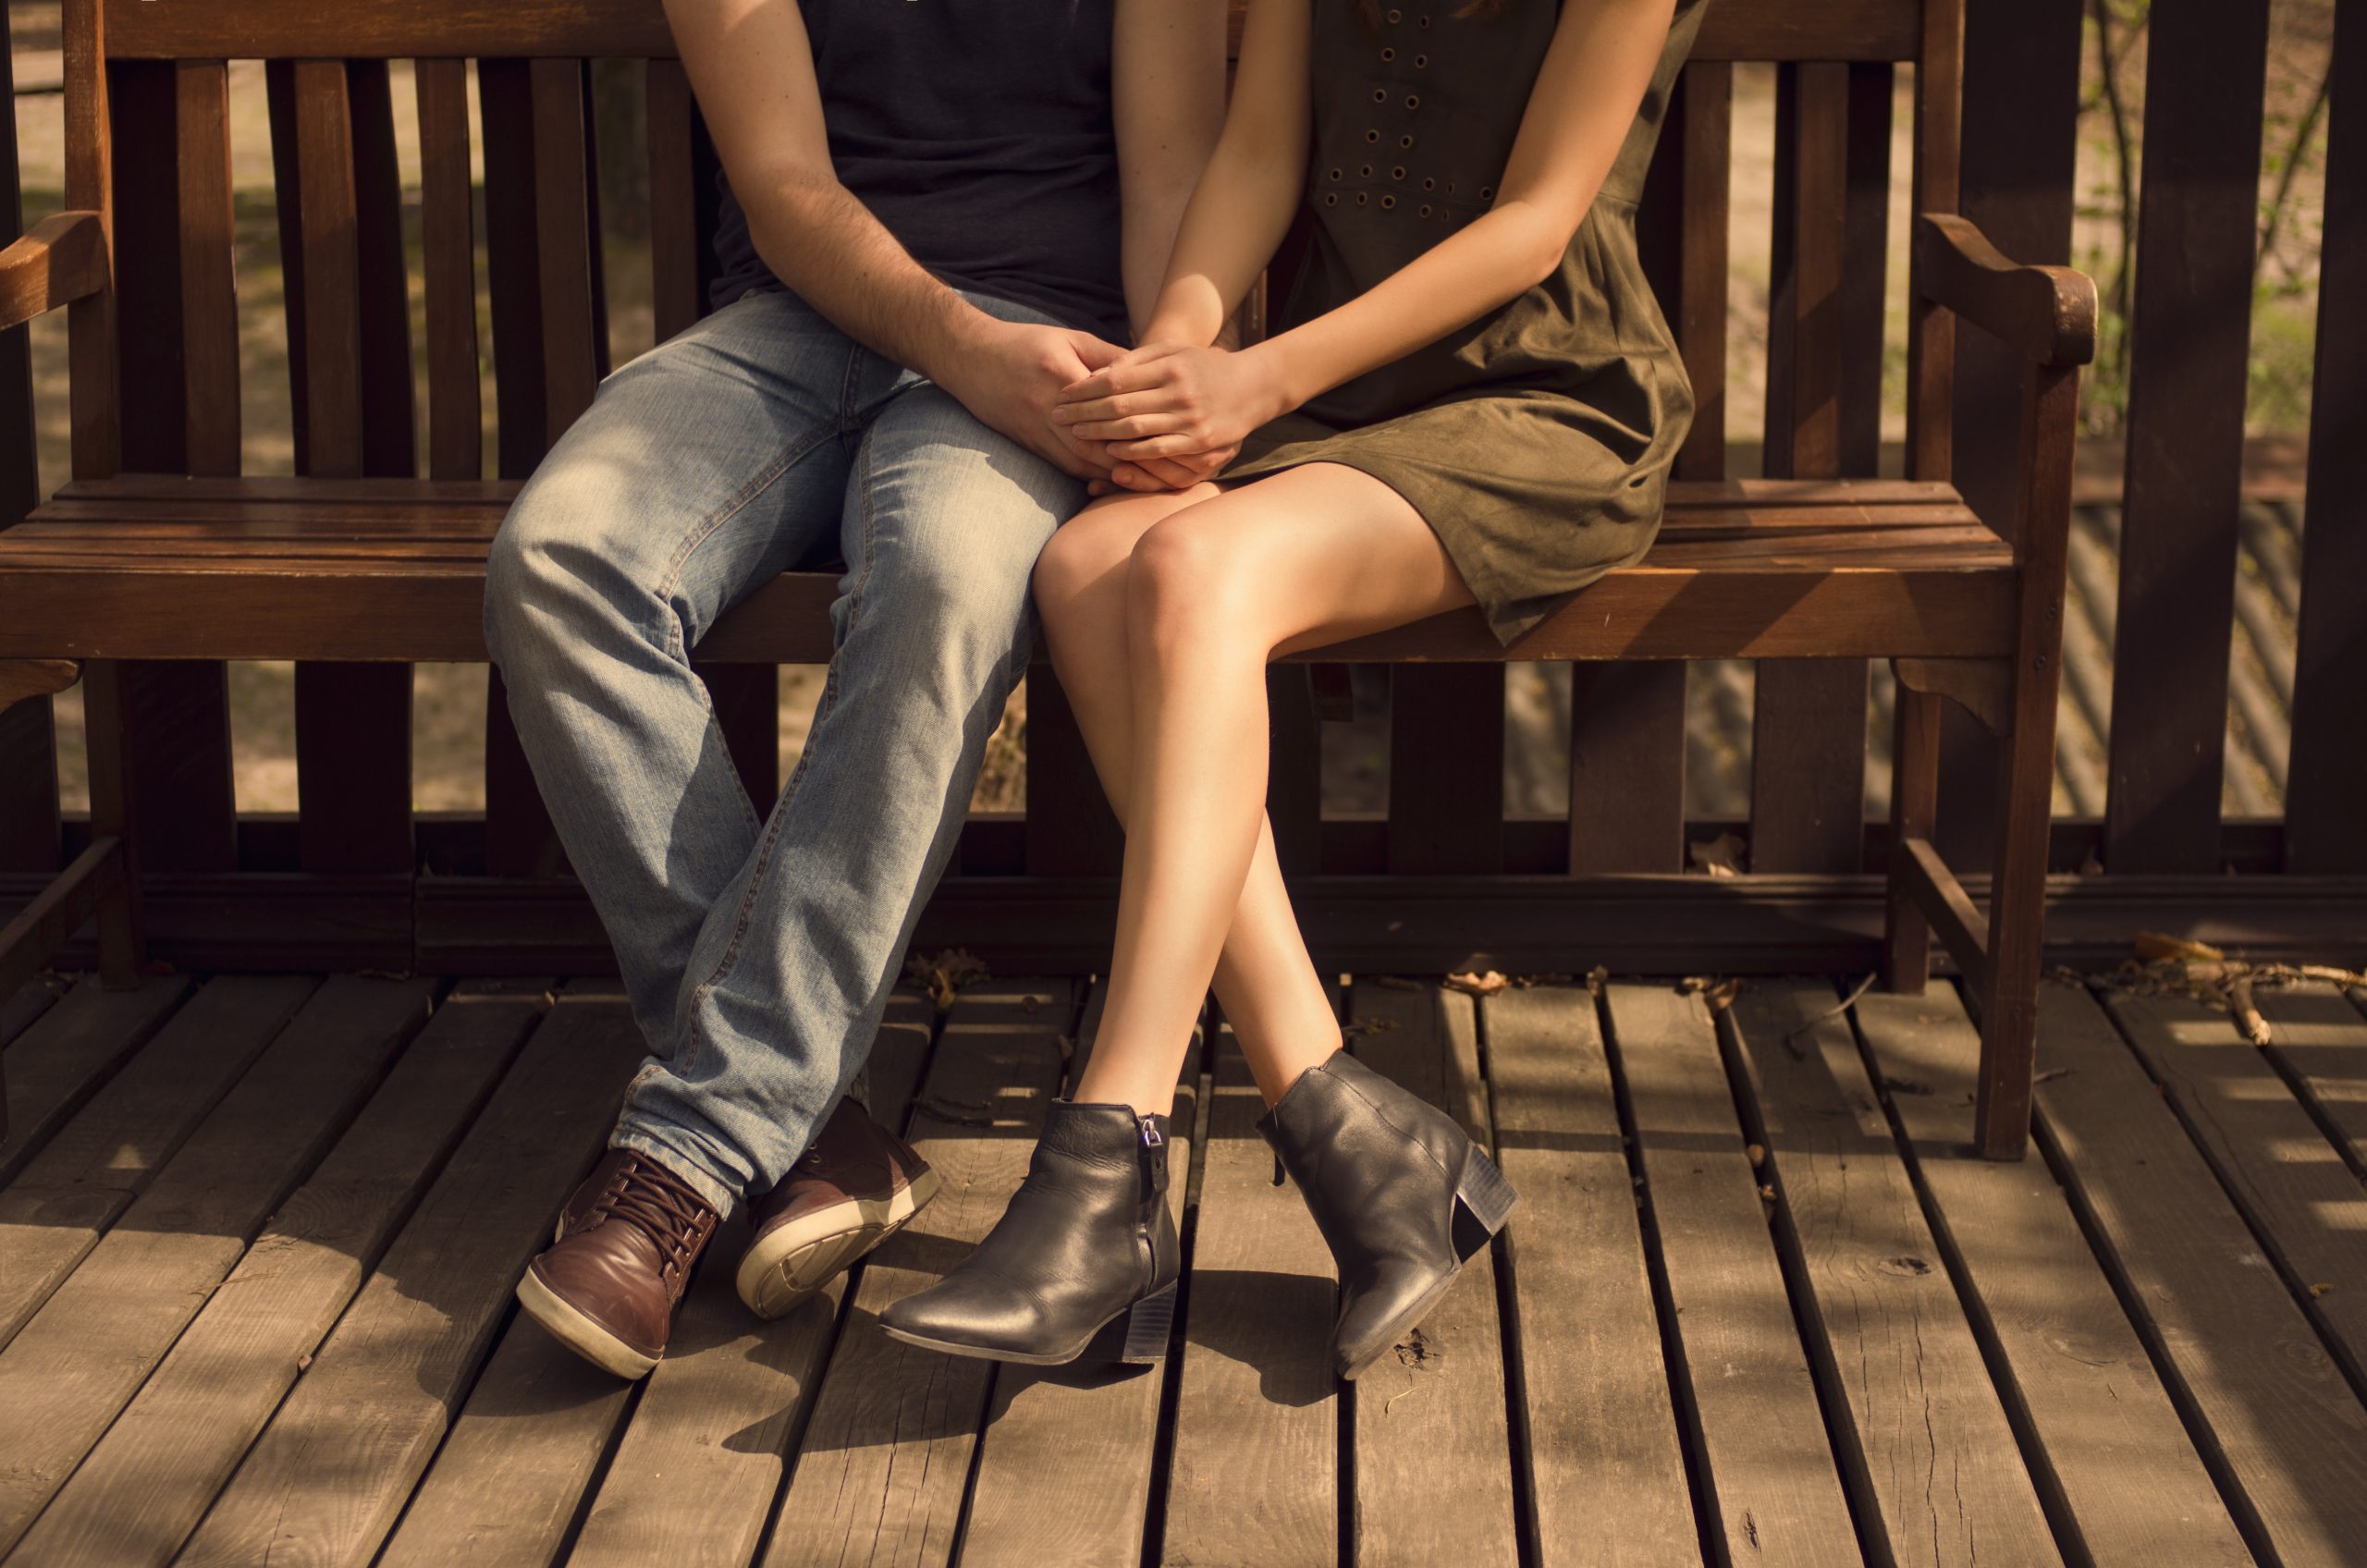 This picture shows a young couple holding hands while seated on a bench.